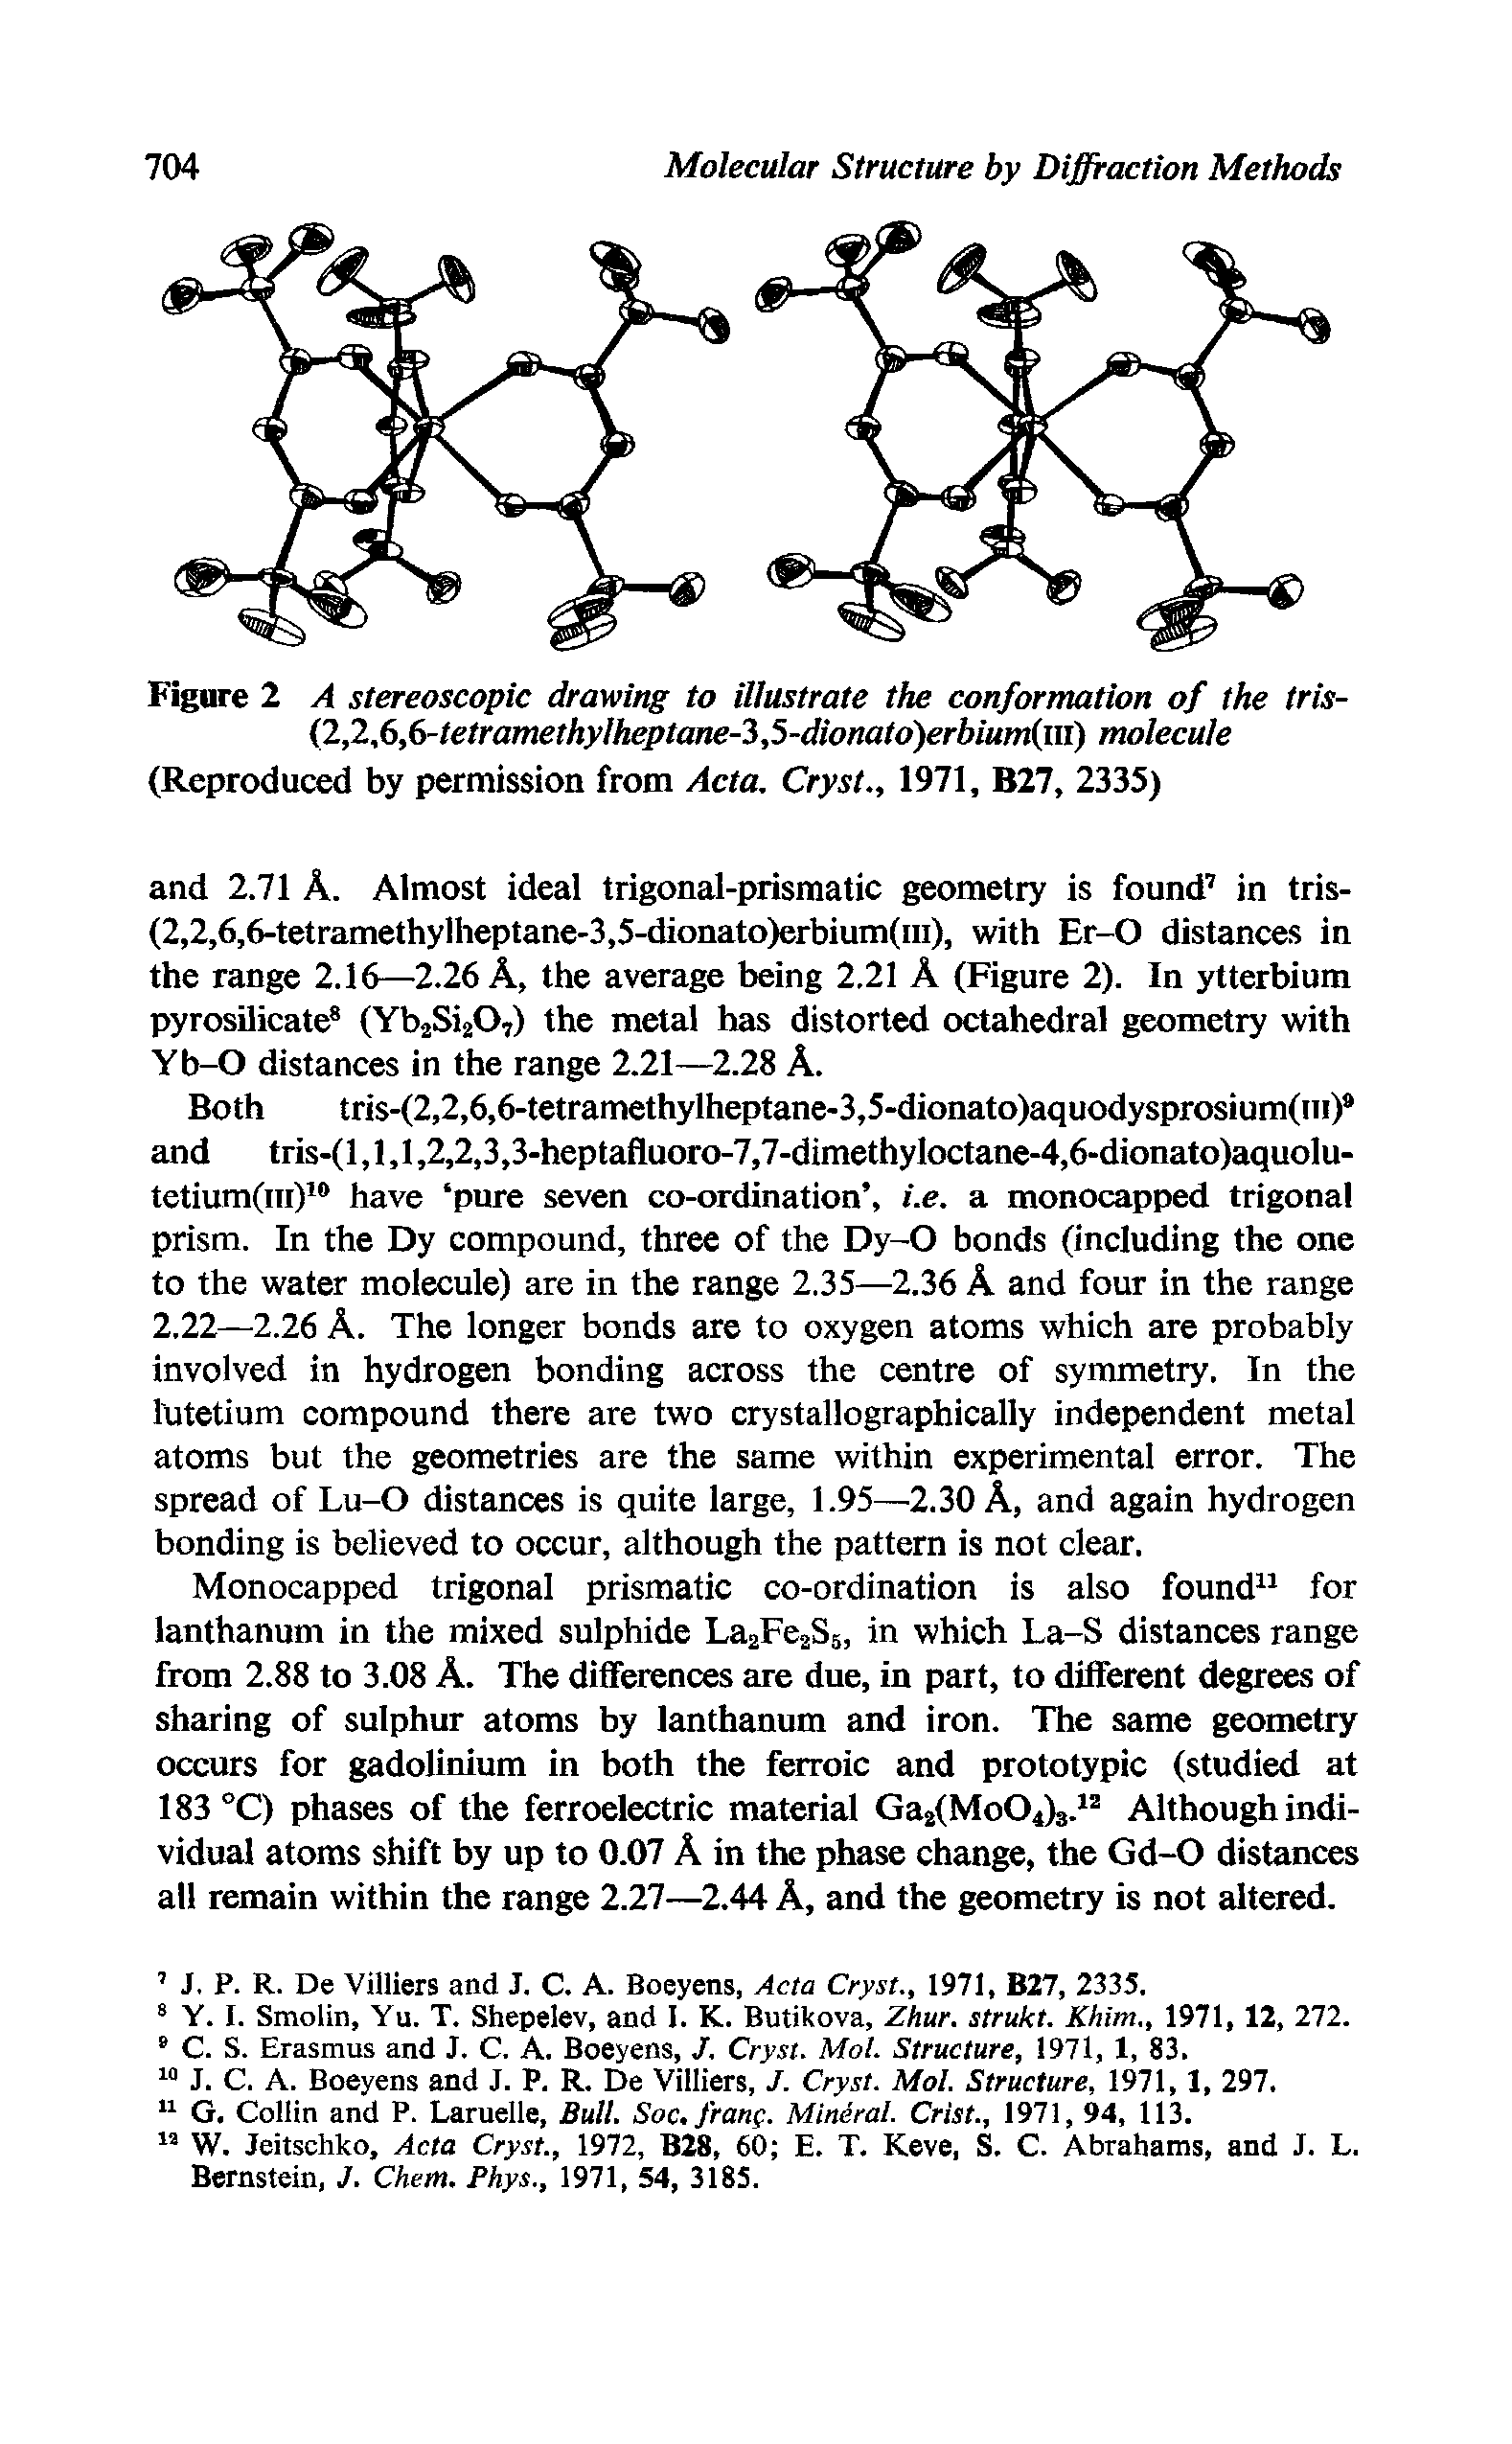 Figure 2 A stereoscopic drawing to illustrate the conformation of the tris-(2,2,6,6-tetramethylheptane-3,5-dionato )erbium(in) molecule (Reproduced by permission from Acta, Cryst., 1971, B27, 2335)...